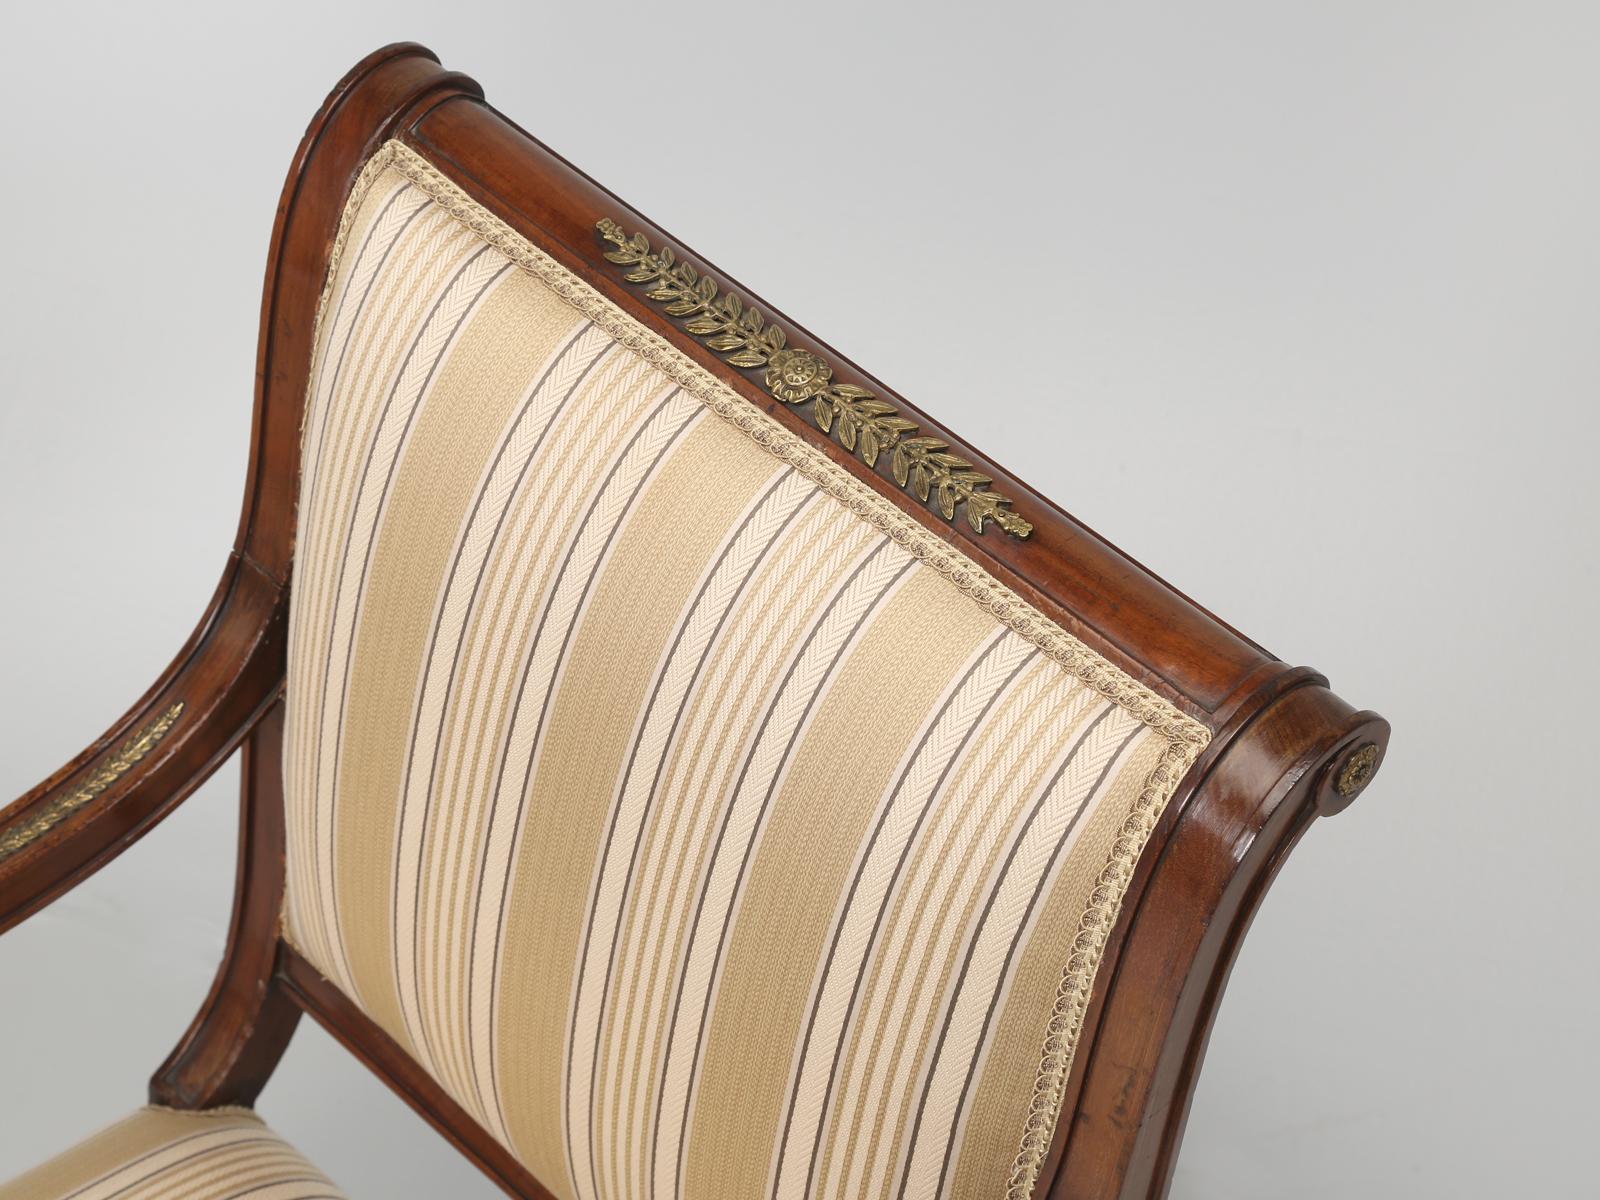 A fine Empire Revival Gilt-Bronze Mounted mahogany pair of chairs. Whenever we look at an antique piece of furniture with bronze castings, we closely inspect the quality of the bronze details, which most often tend to be weak. The pair of French